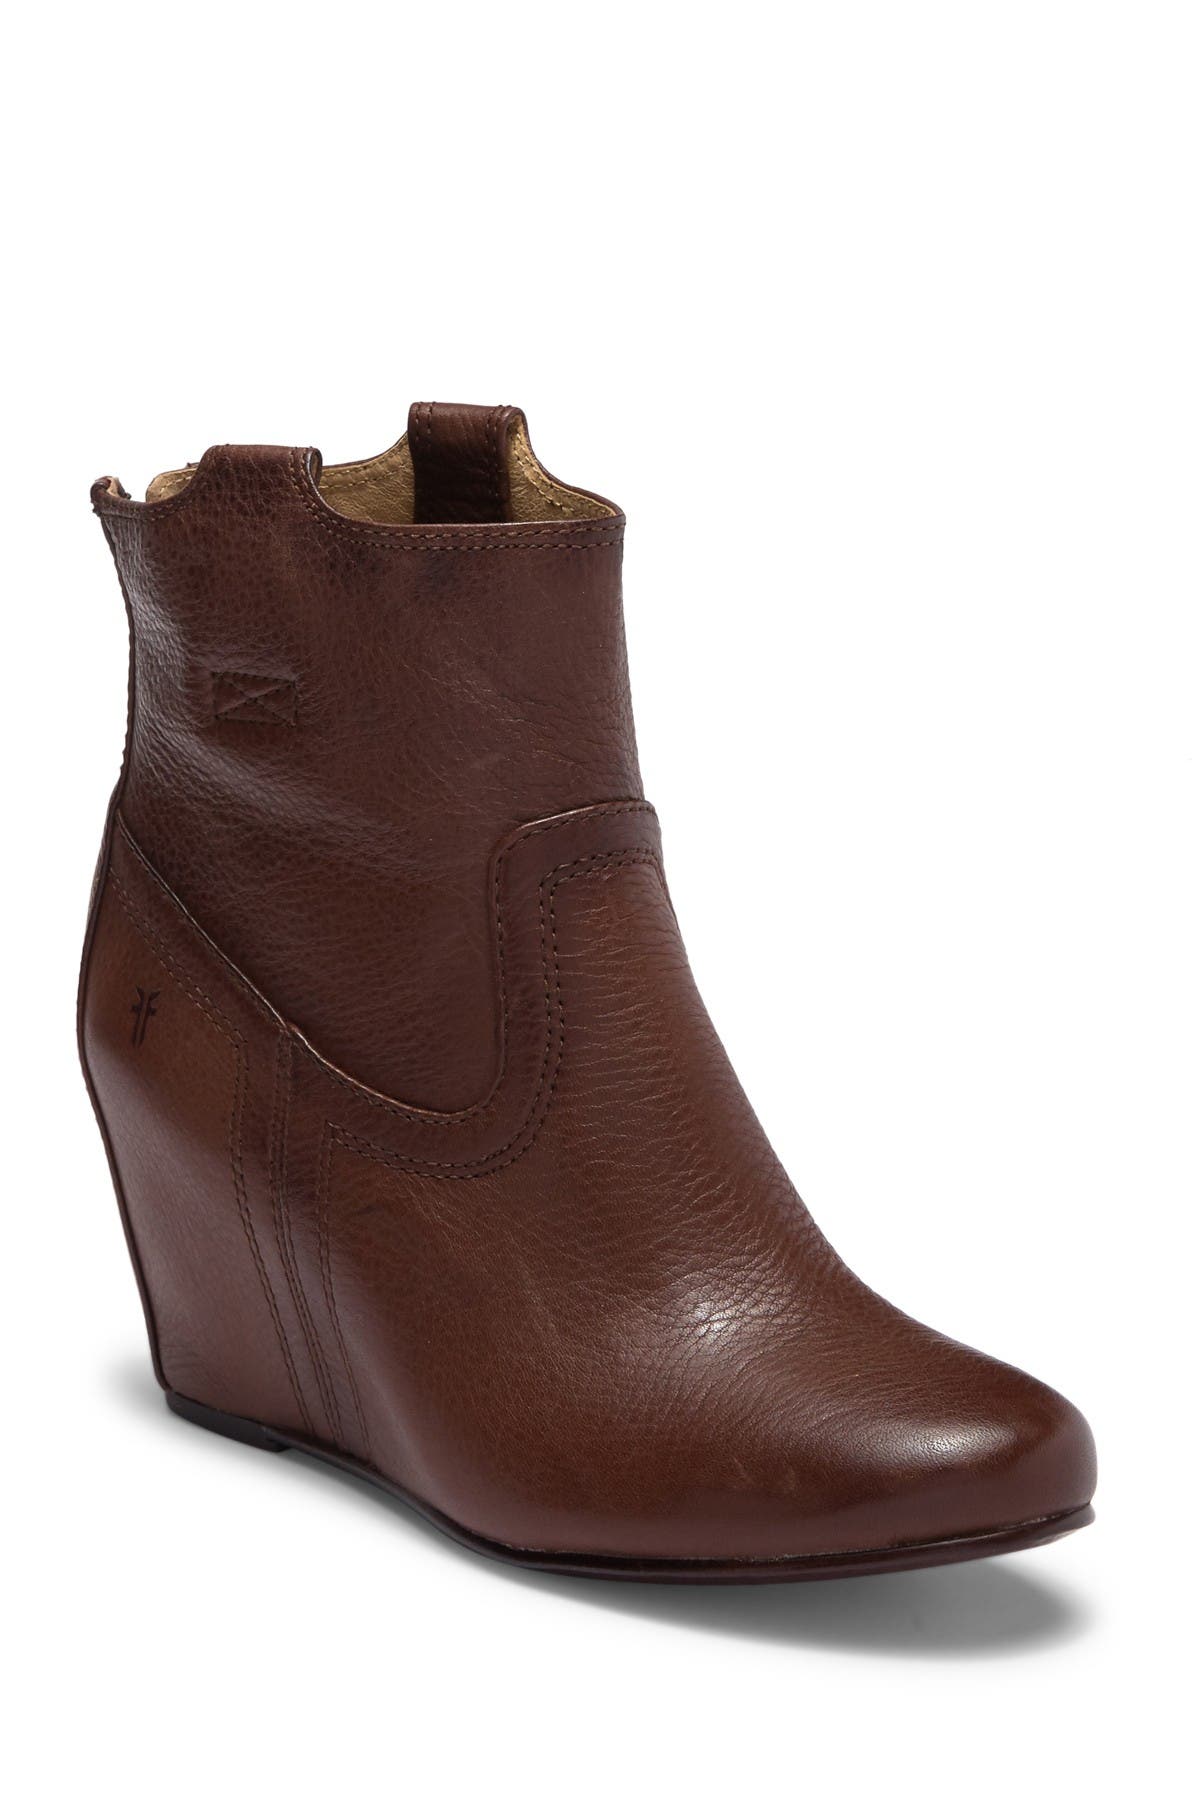 carson wedge bootie